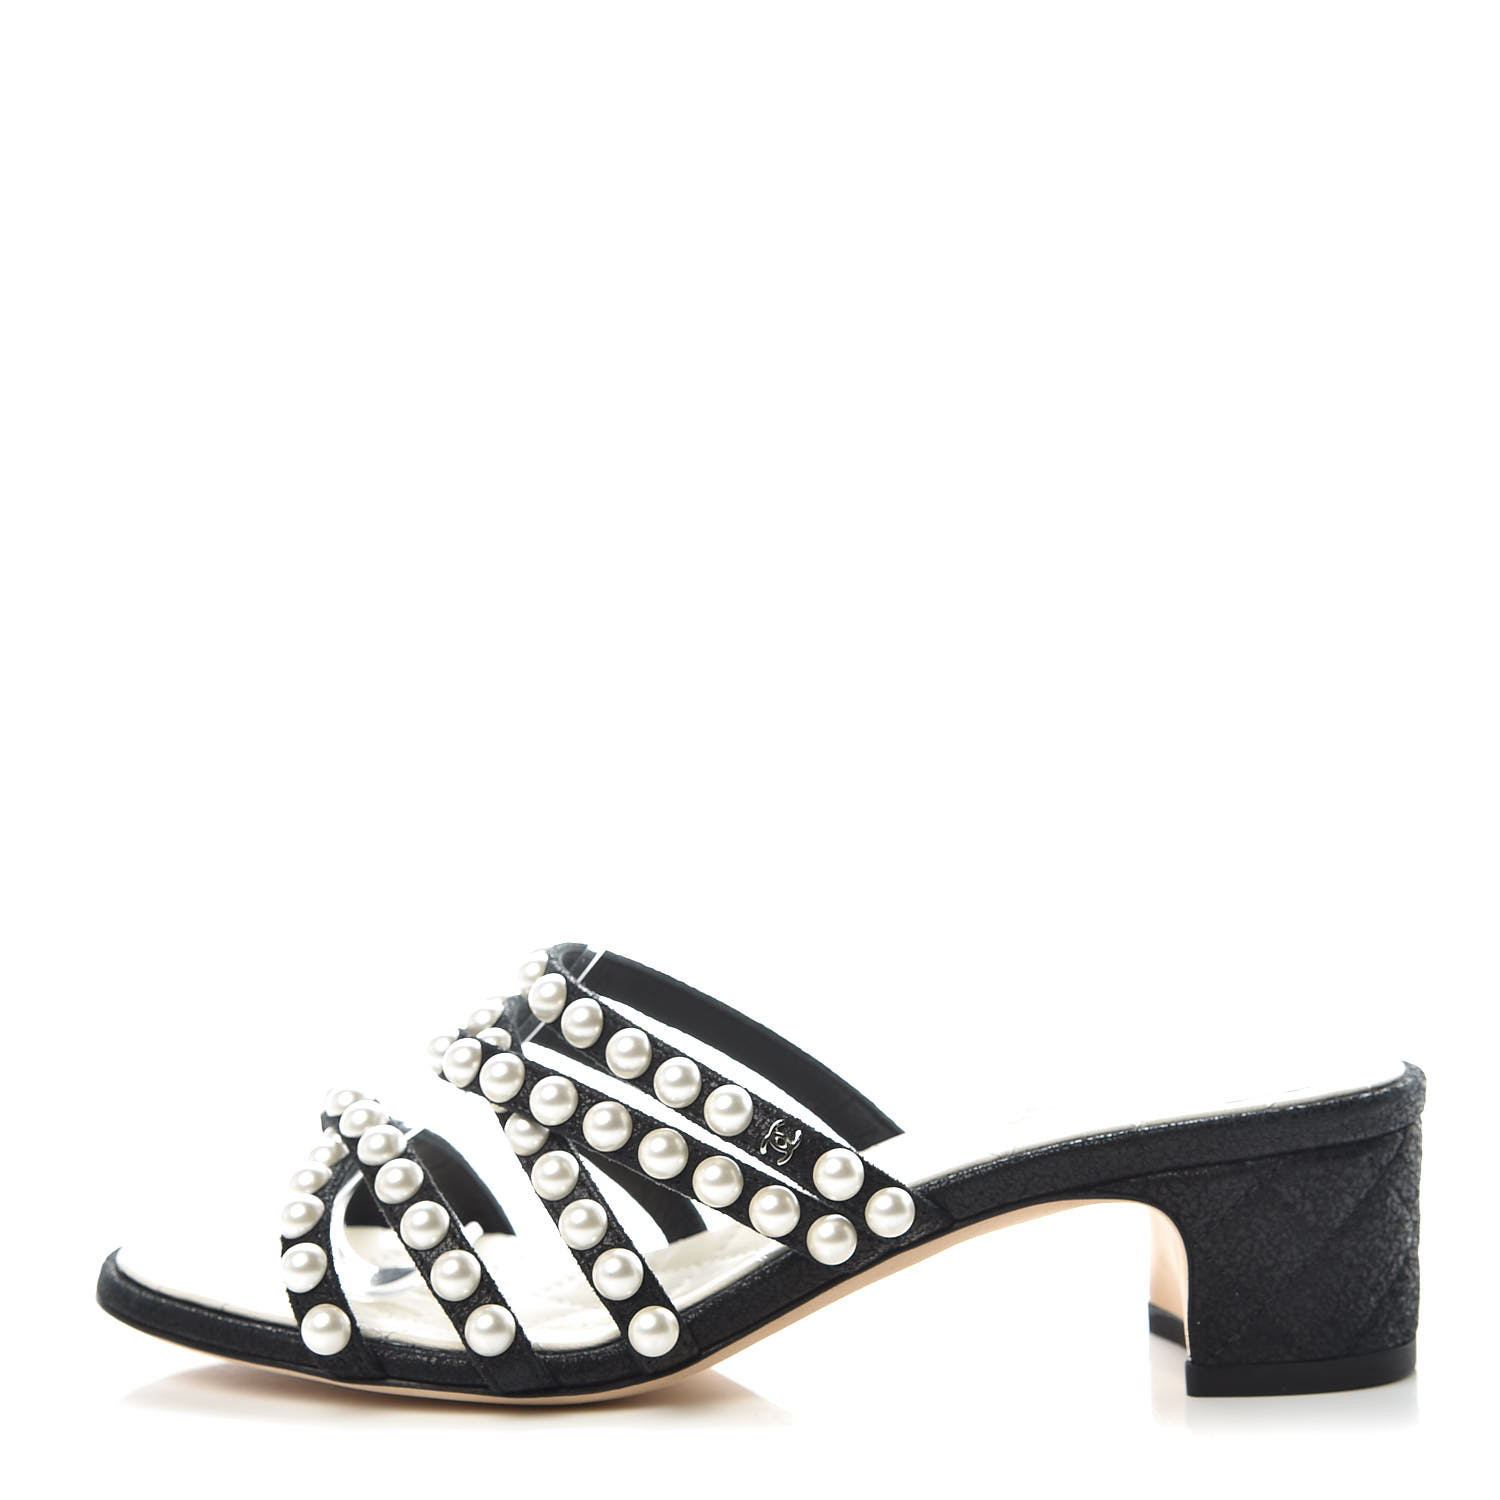 CHANEL Crackled Lambskin Pearl Mules 35.5 Black 418802 | FASHIONPHILE